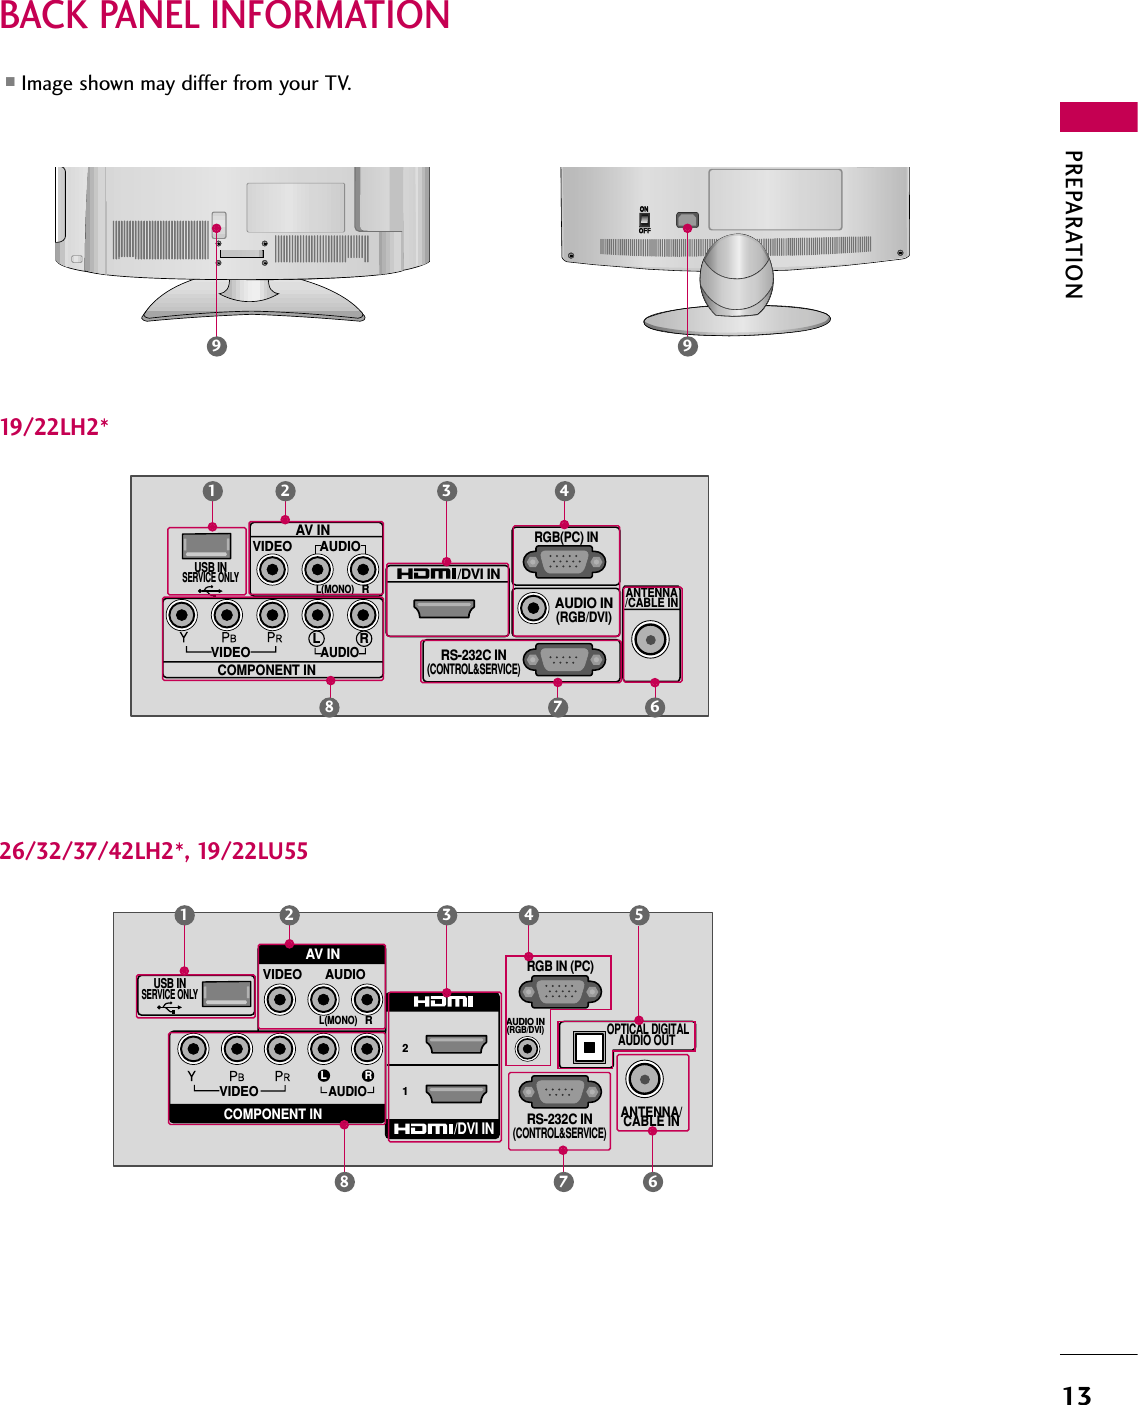 PREPARATION13BACK PANEL INFORMATIONRS-232C IN(CONTROL&amp;SERVICE)AUDIO IN(RGB/DVI)ANTENNA/CABLE INVIDEOAUDIOL RRGB(PC) IN/DVI INAV INVIDEO AUDIOL(MONO)RCOMPONENT INUSB INSERVICE ONLY21 43USB INSERVICE ONLYRS-232C IN(CONTROL&amp;SERVICE)AUDIO IN(RGB/DVI)ANTENNA/CABLE INVIDEOAUDIORGB IN (PC)VIDEO AUDIOL(MONO)R21L ROPTICAL DIGITALAUDIO OUT /DVI INCOMPONENT INAV IN21326/32/37/42LH2*, 19/22LU5519/22LH2*457 687 689❖◆❖◆❖❋❋❖❋❋9■Image shown may differ from your TV.